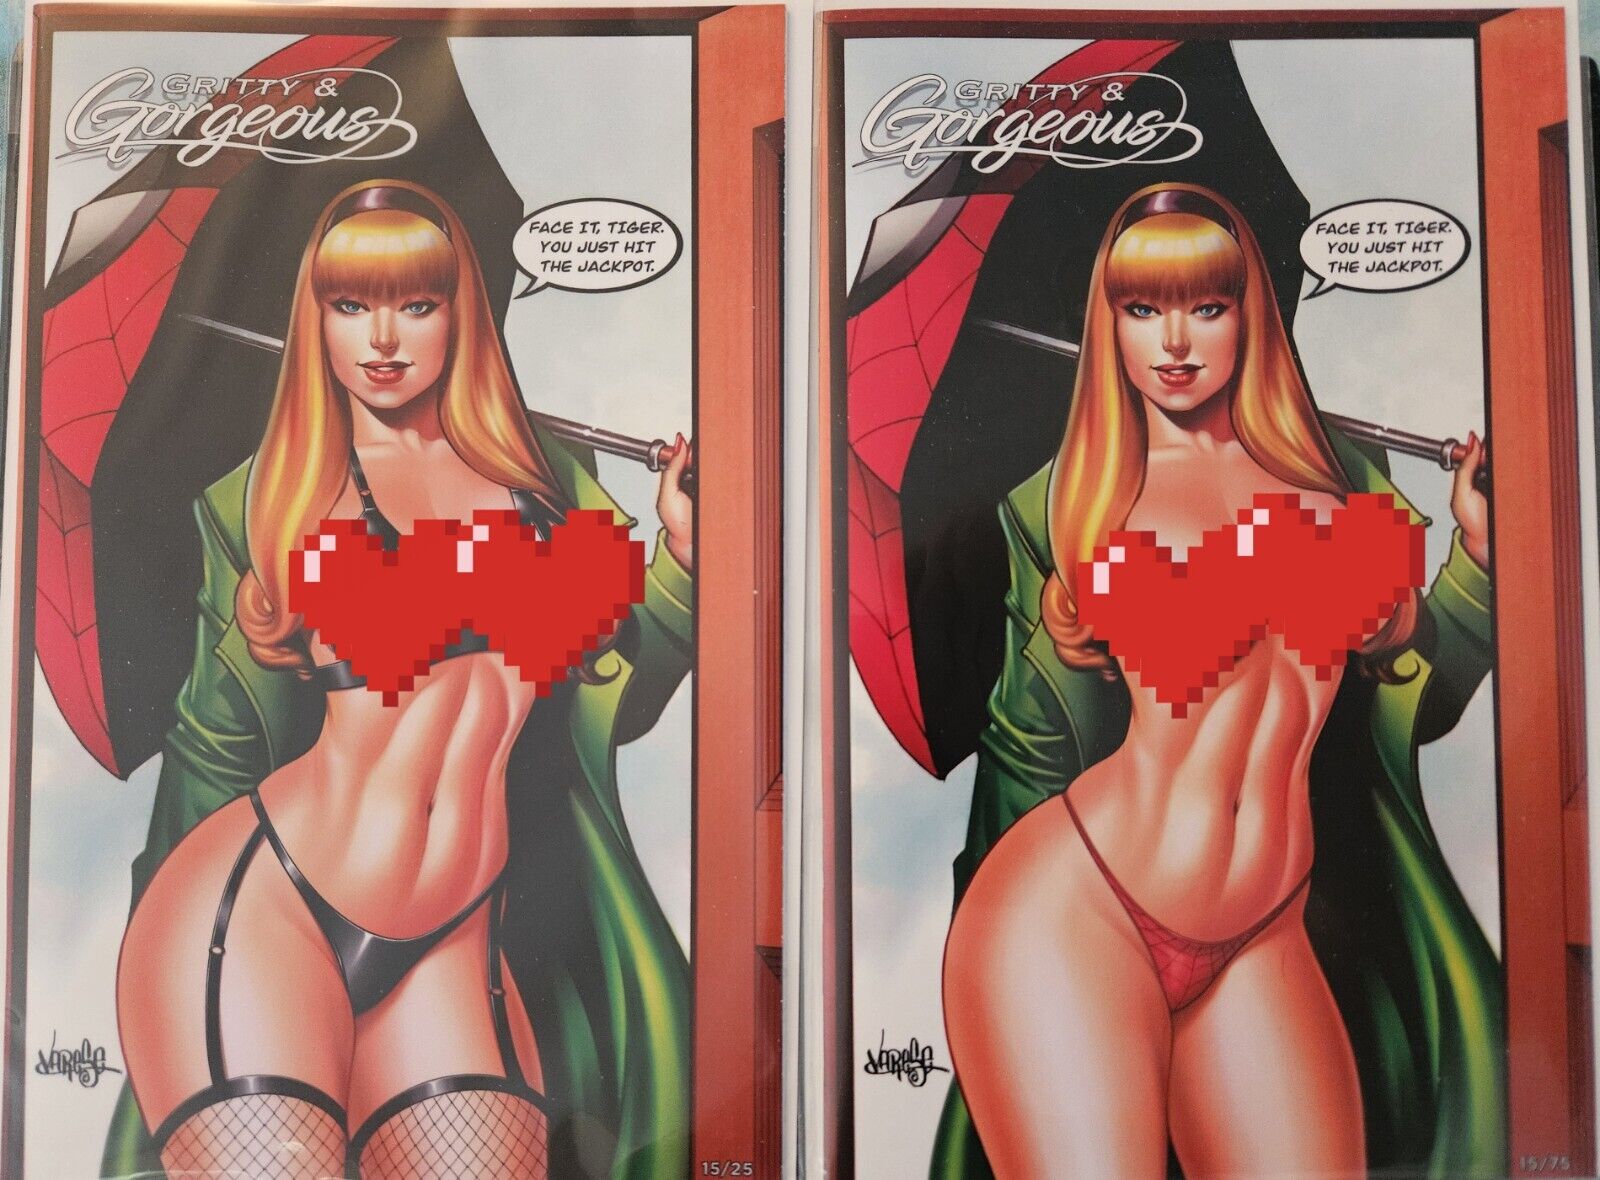 Gritty & Gorgeous Gwen Stacy Jose Varese Variant #15/25-15/75 RARE HTF